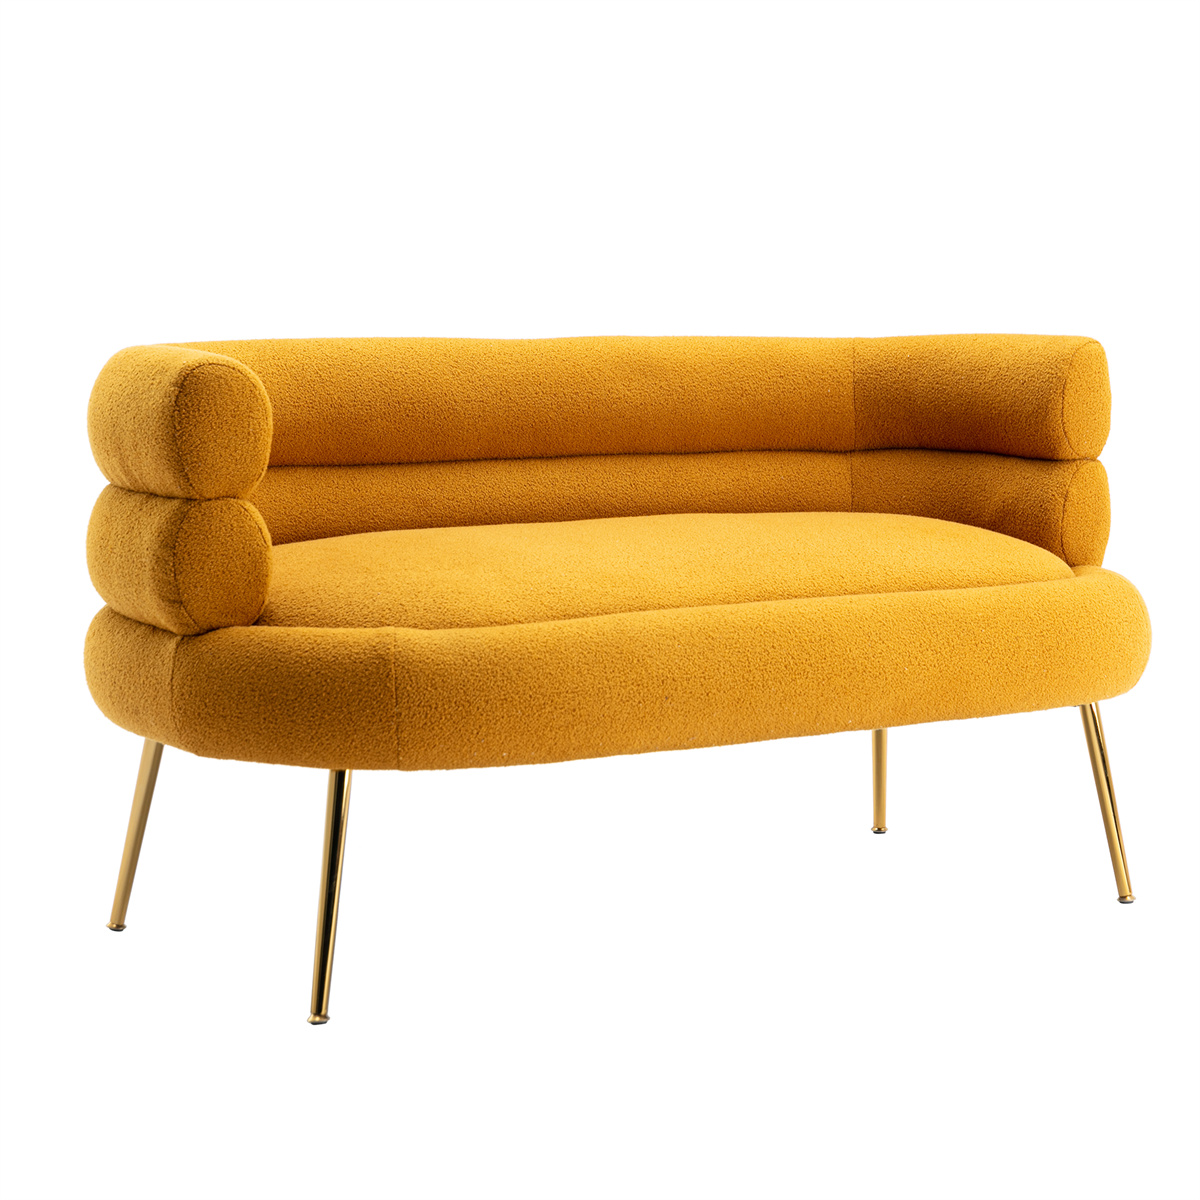 Living Room Accent Sofa, Leisure Loveseat Sofa with Golden Metal Feet, Tufted Chaise Lounge Sofa with Curved Back, Upholstered Sofa Reading Chair for Home Apartment or Office, Mustard - image 5 of 7